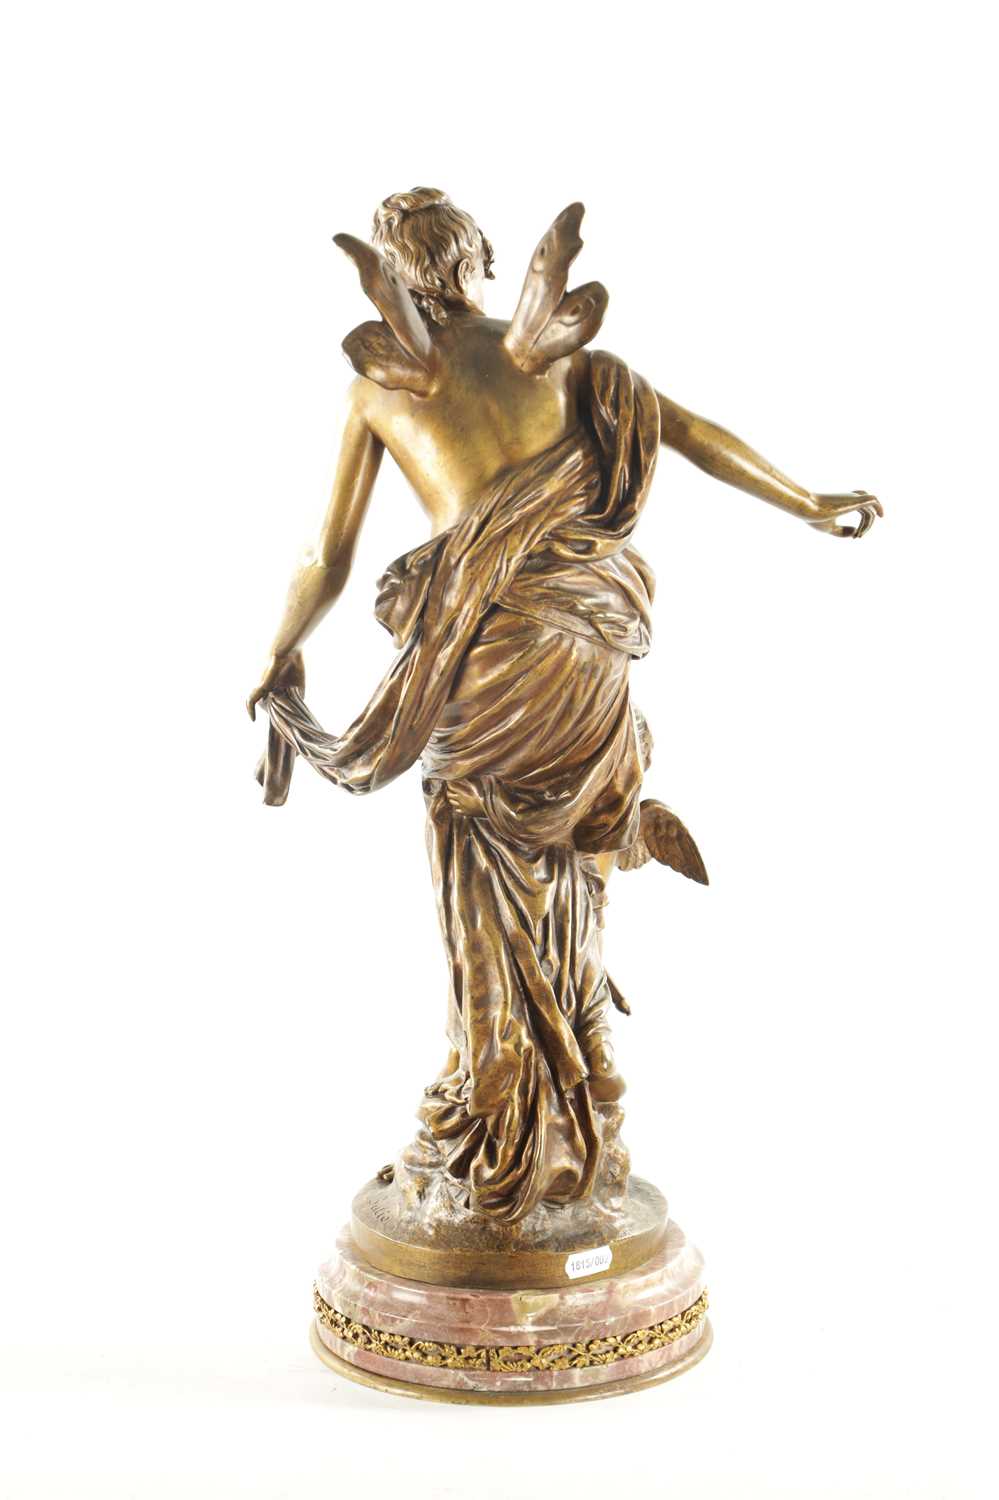 JEAN BULIO (FRENCH 1827 - 1911) A 19TH CENTURY GILT BRONZE FIGURE DEPICTING ‘PSYCHE AND LOVE’ - Image 8 of 8